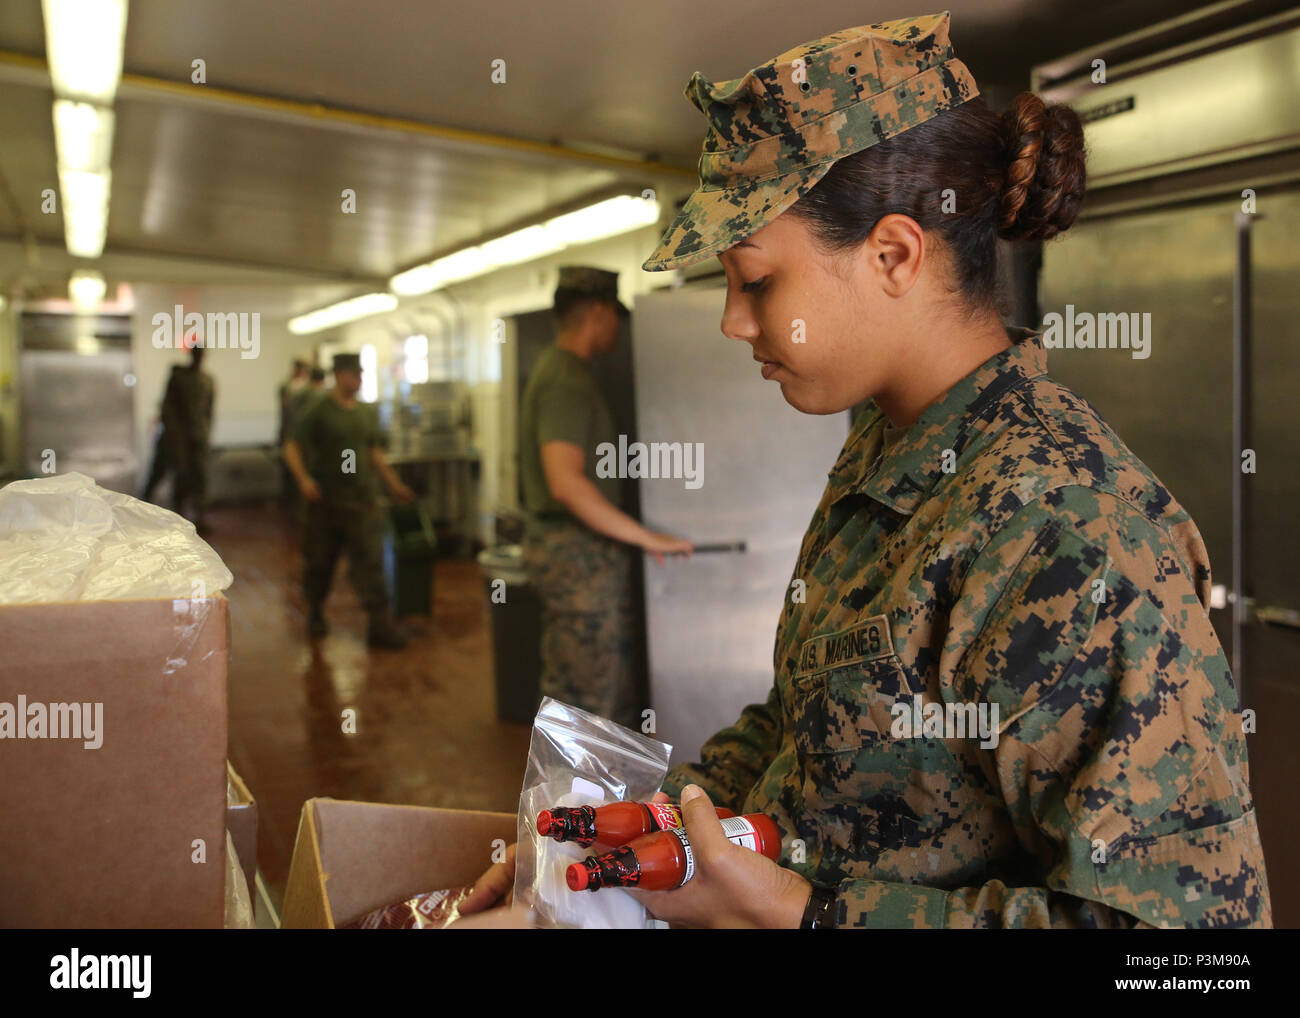 160710-N-ND246-006 POHAKULOA TRAINING AREA, Hawaii (July 10, 2016) – Lance Cpl. Alexis Walton empties a box at a mess hall in Pohakuloa Training Area, Hawaii, July 10, 2016, during Rim of the Pacific 2016. Twenty-six nations, 49 ships, six submarines, about 200 aircraft, and 25,000 personnel are participating in RIMPAC 2016 from June 29 to Aug. 4 in and around the Hawaiian Islands and Southern California. The world’s largest international maritime exercise, RIMPAC provides a unique training opportunity while fostering and sustaining cooperative relationships between participants critical to en Stock Photo